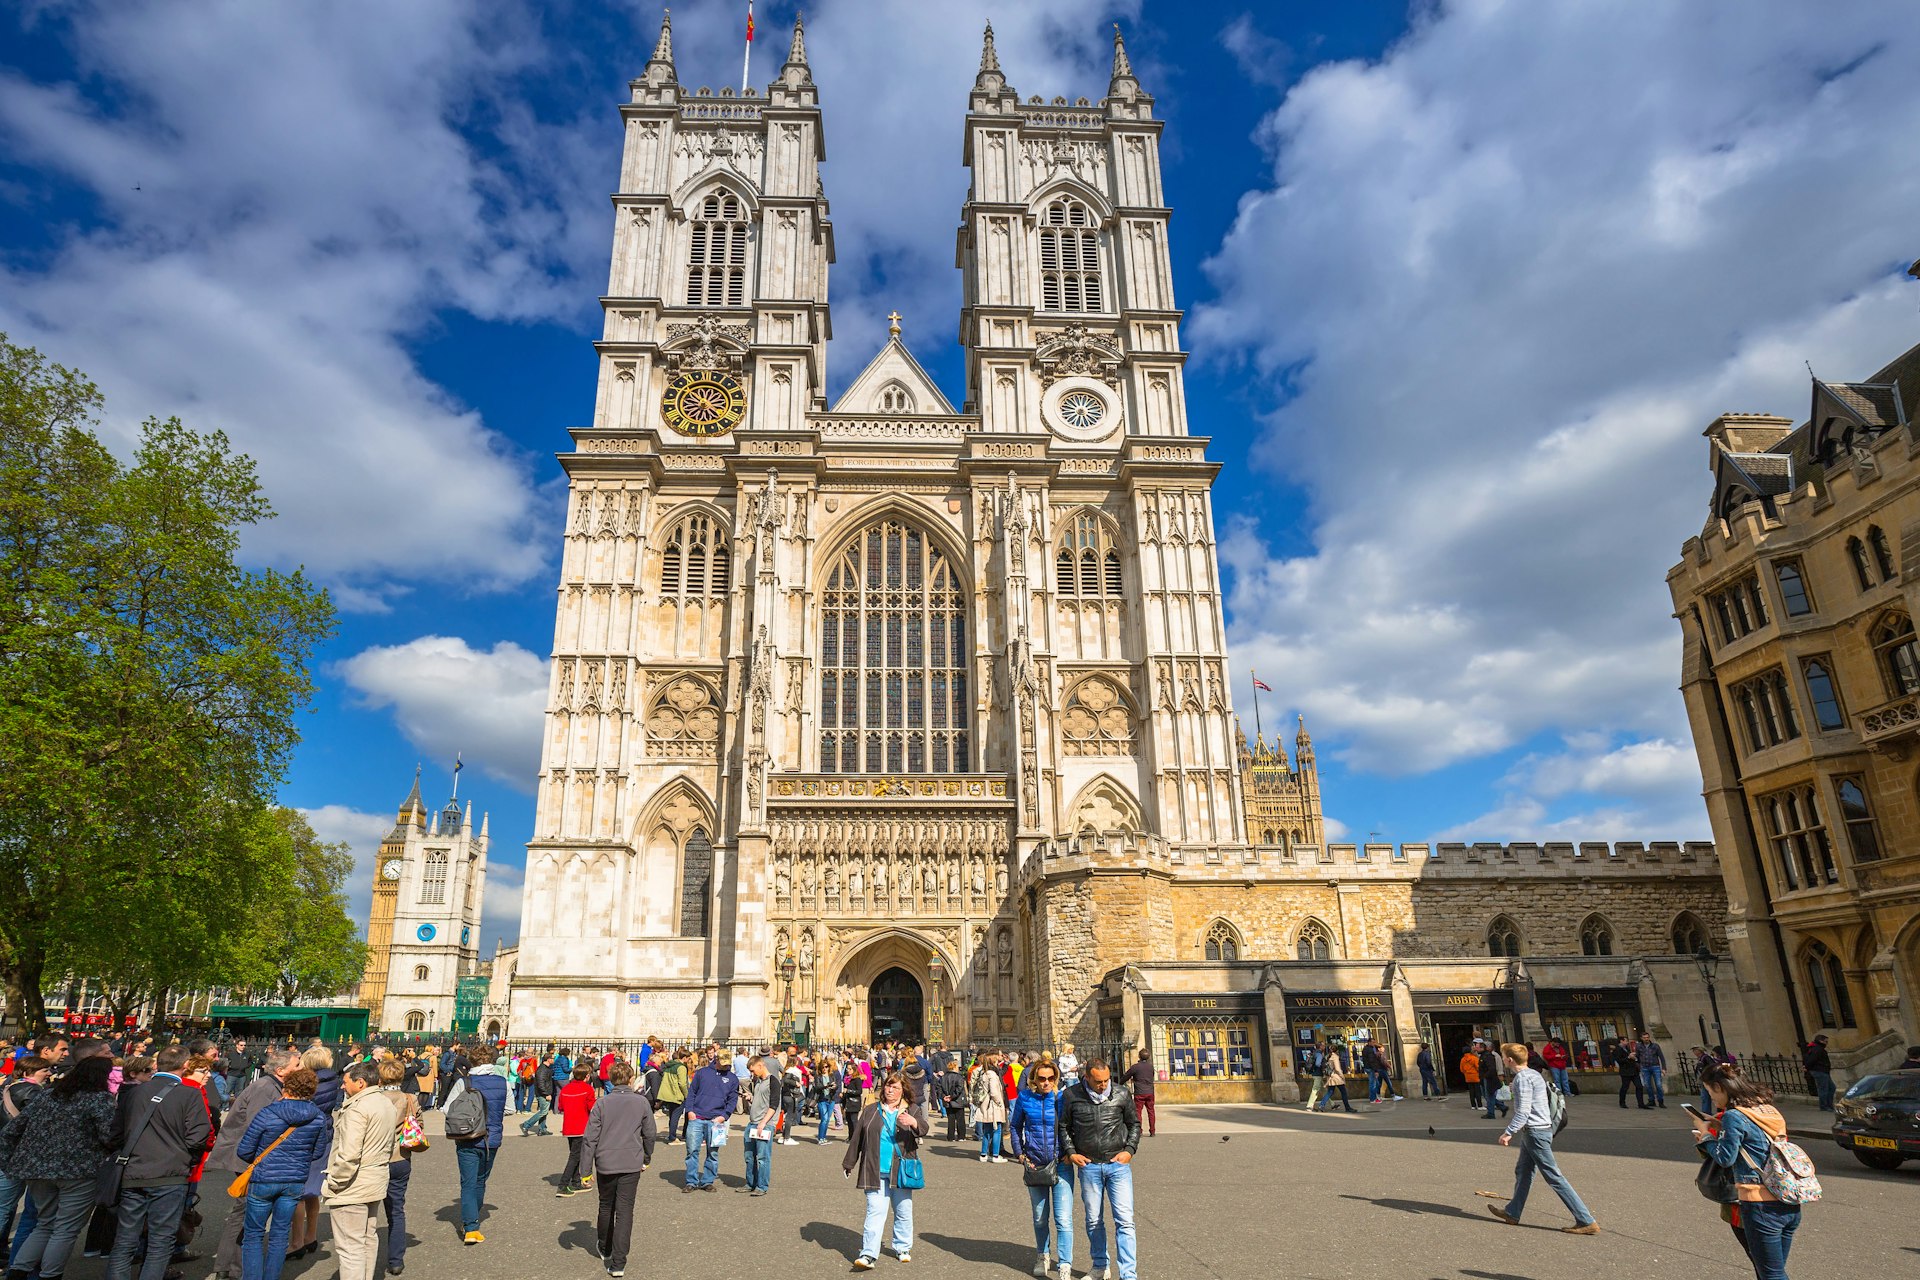 Exterior of the Westminster Abbey in London